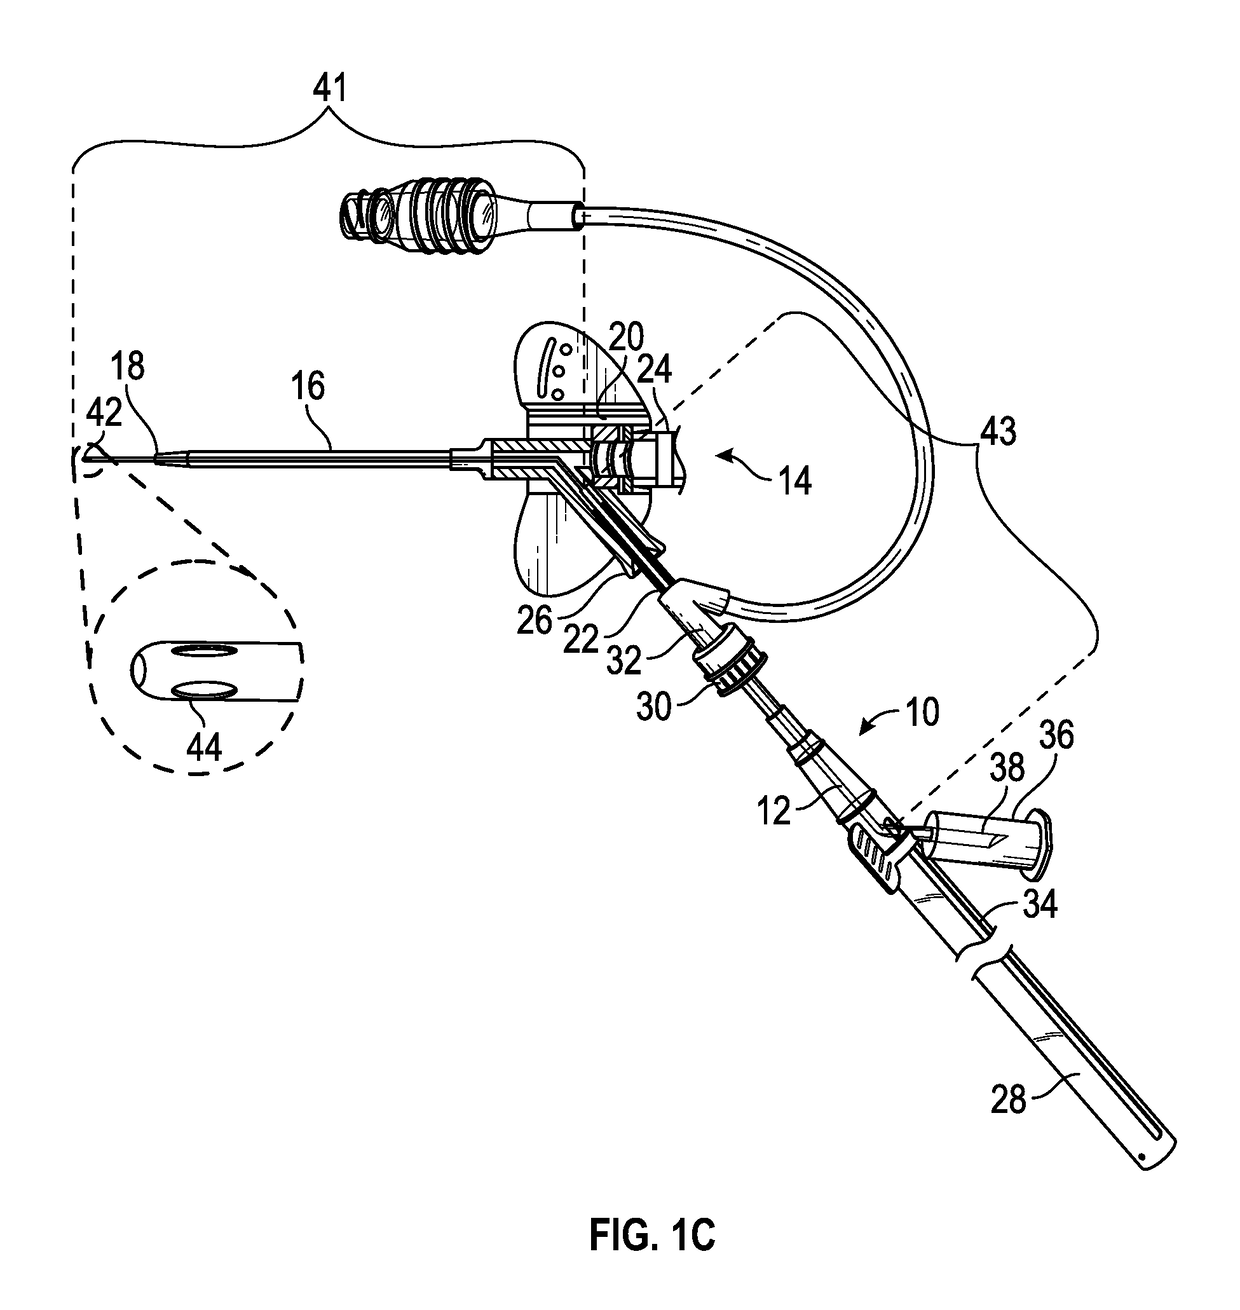 Extension housing a probe or intravenous catheter